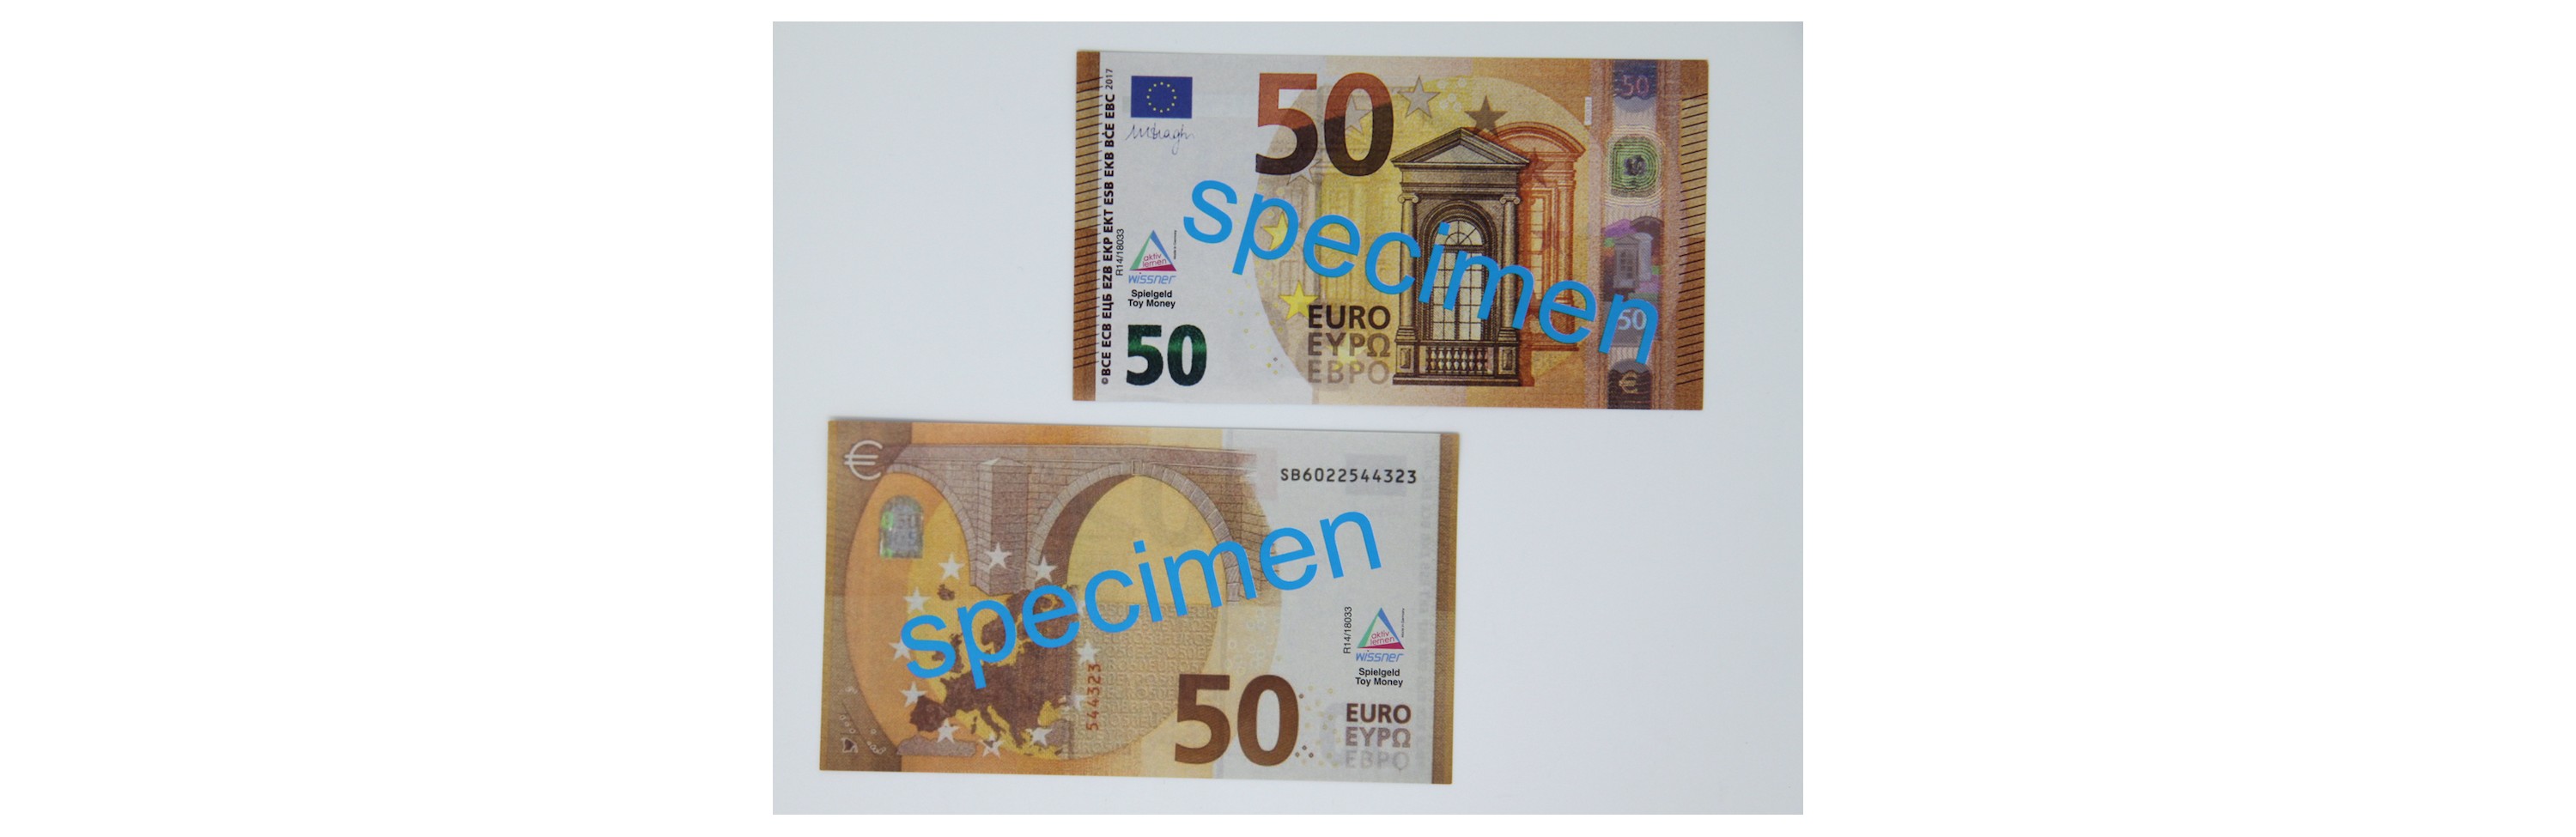 Wissner® active learning - 50 Euro - notes (100 pcs)